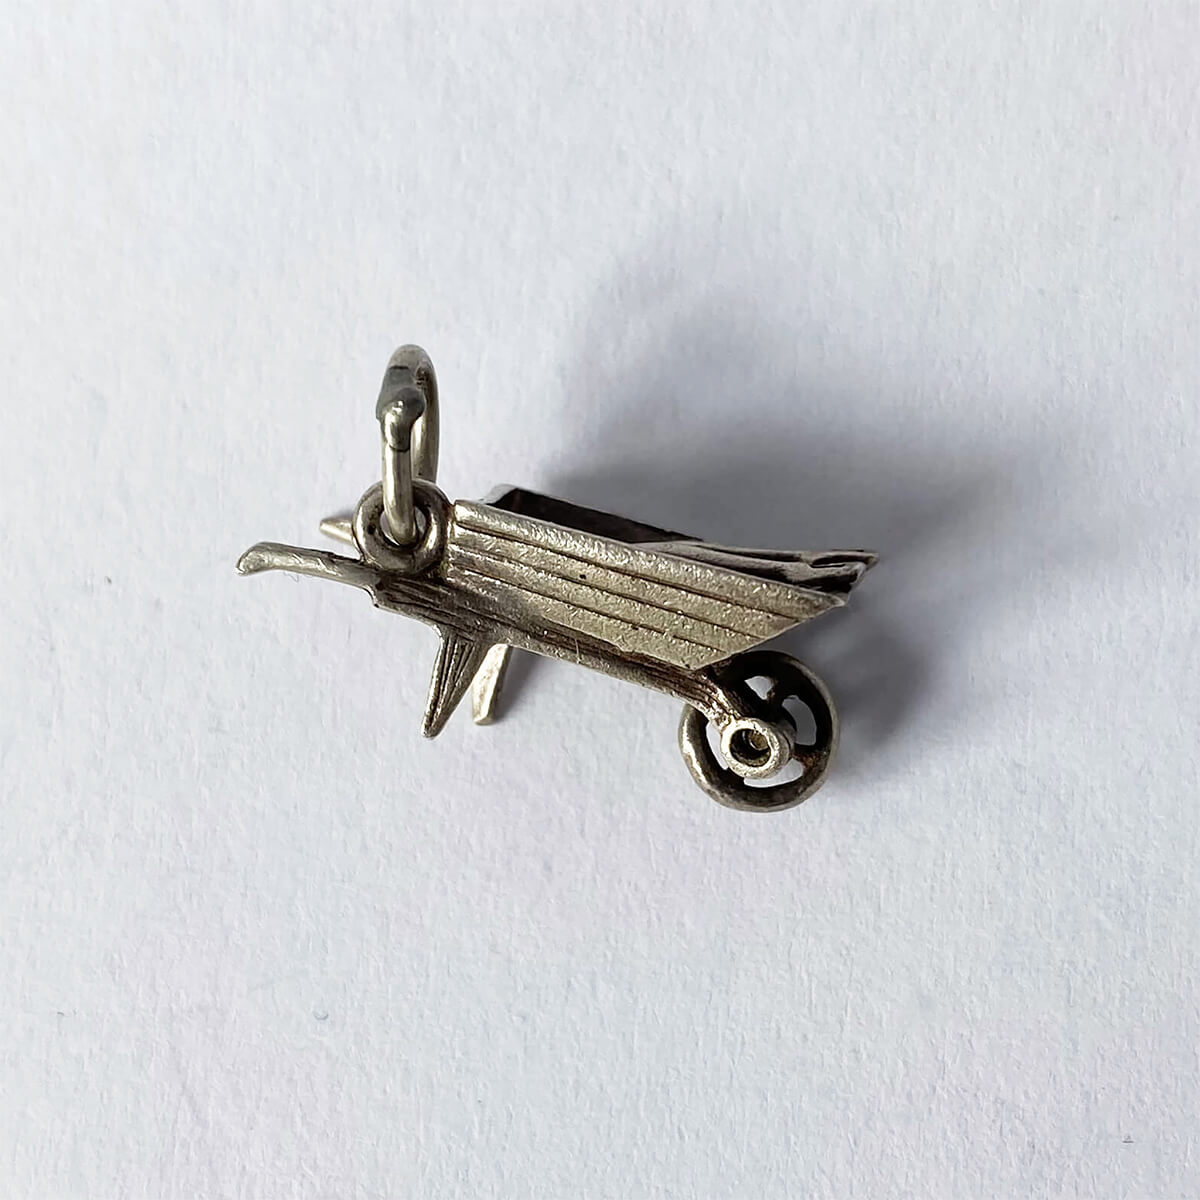 Vintage 1960s sterling silver horticulture wheelbarrow spade and fork charm from Charmarama